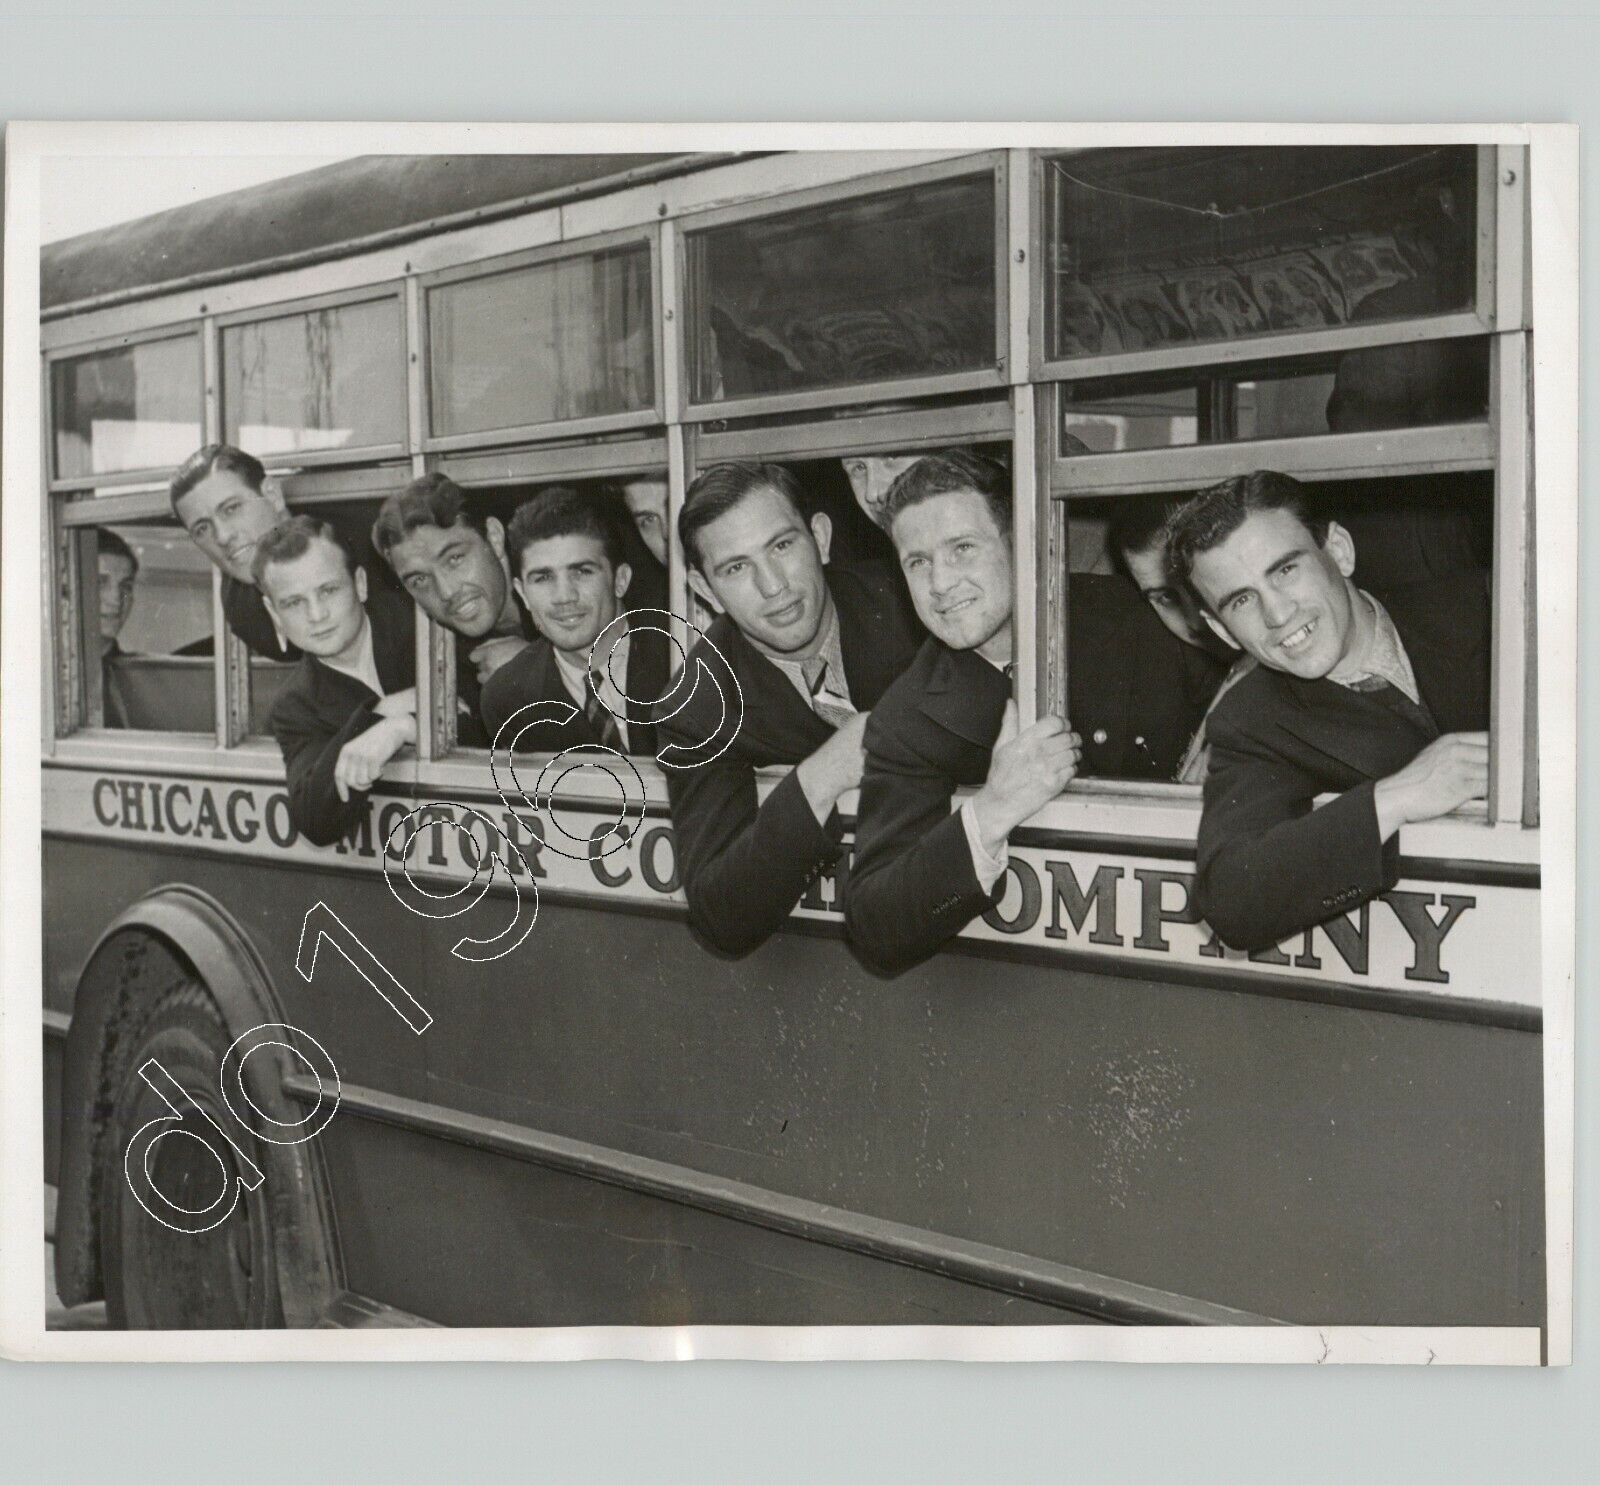 European AMATEUR BOXING Champs Loaded Into BUS In CHICAGO Sport 1937 Press Photo